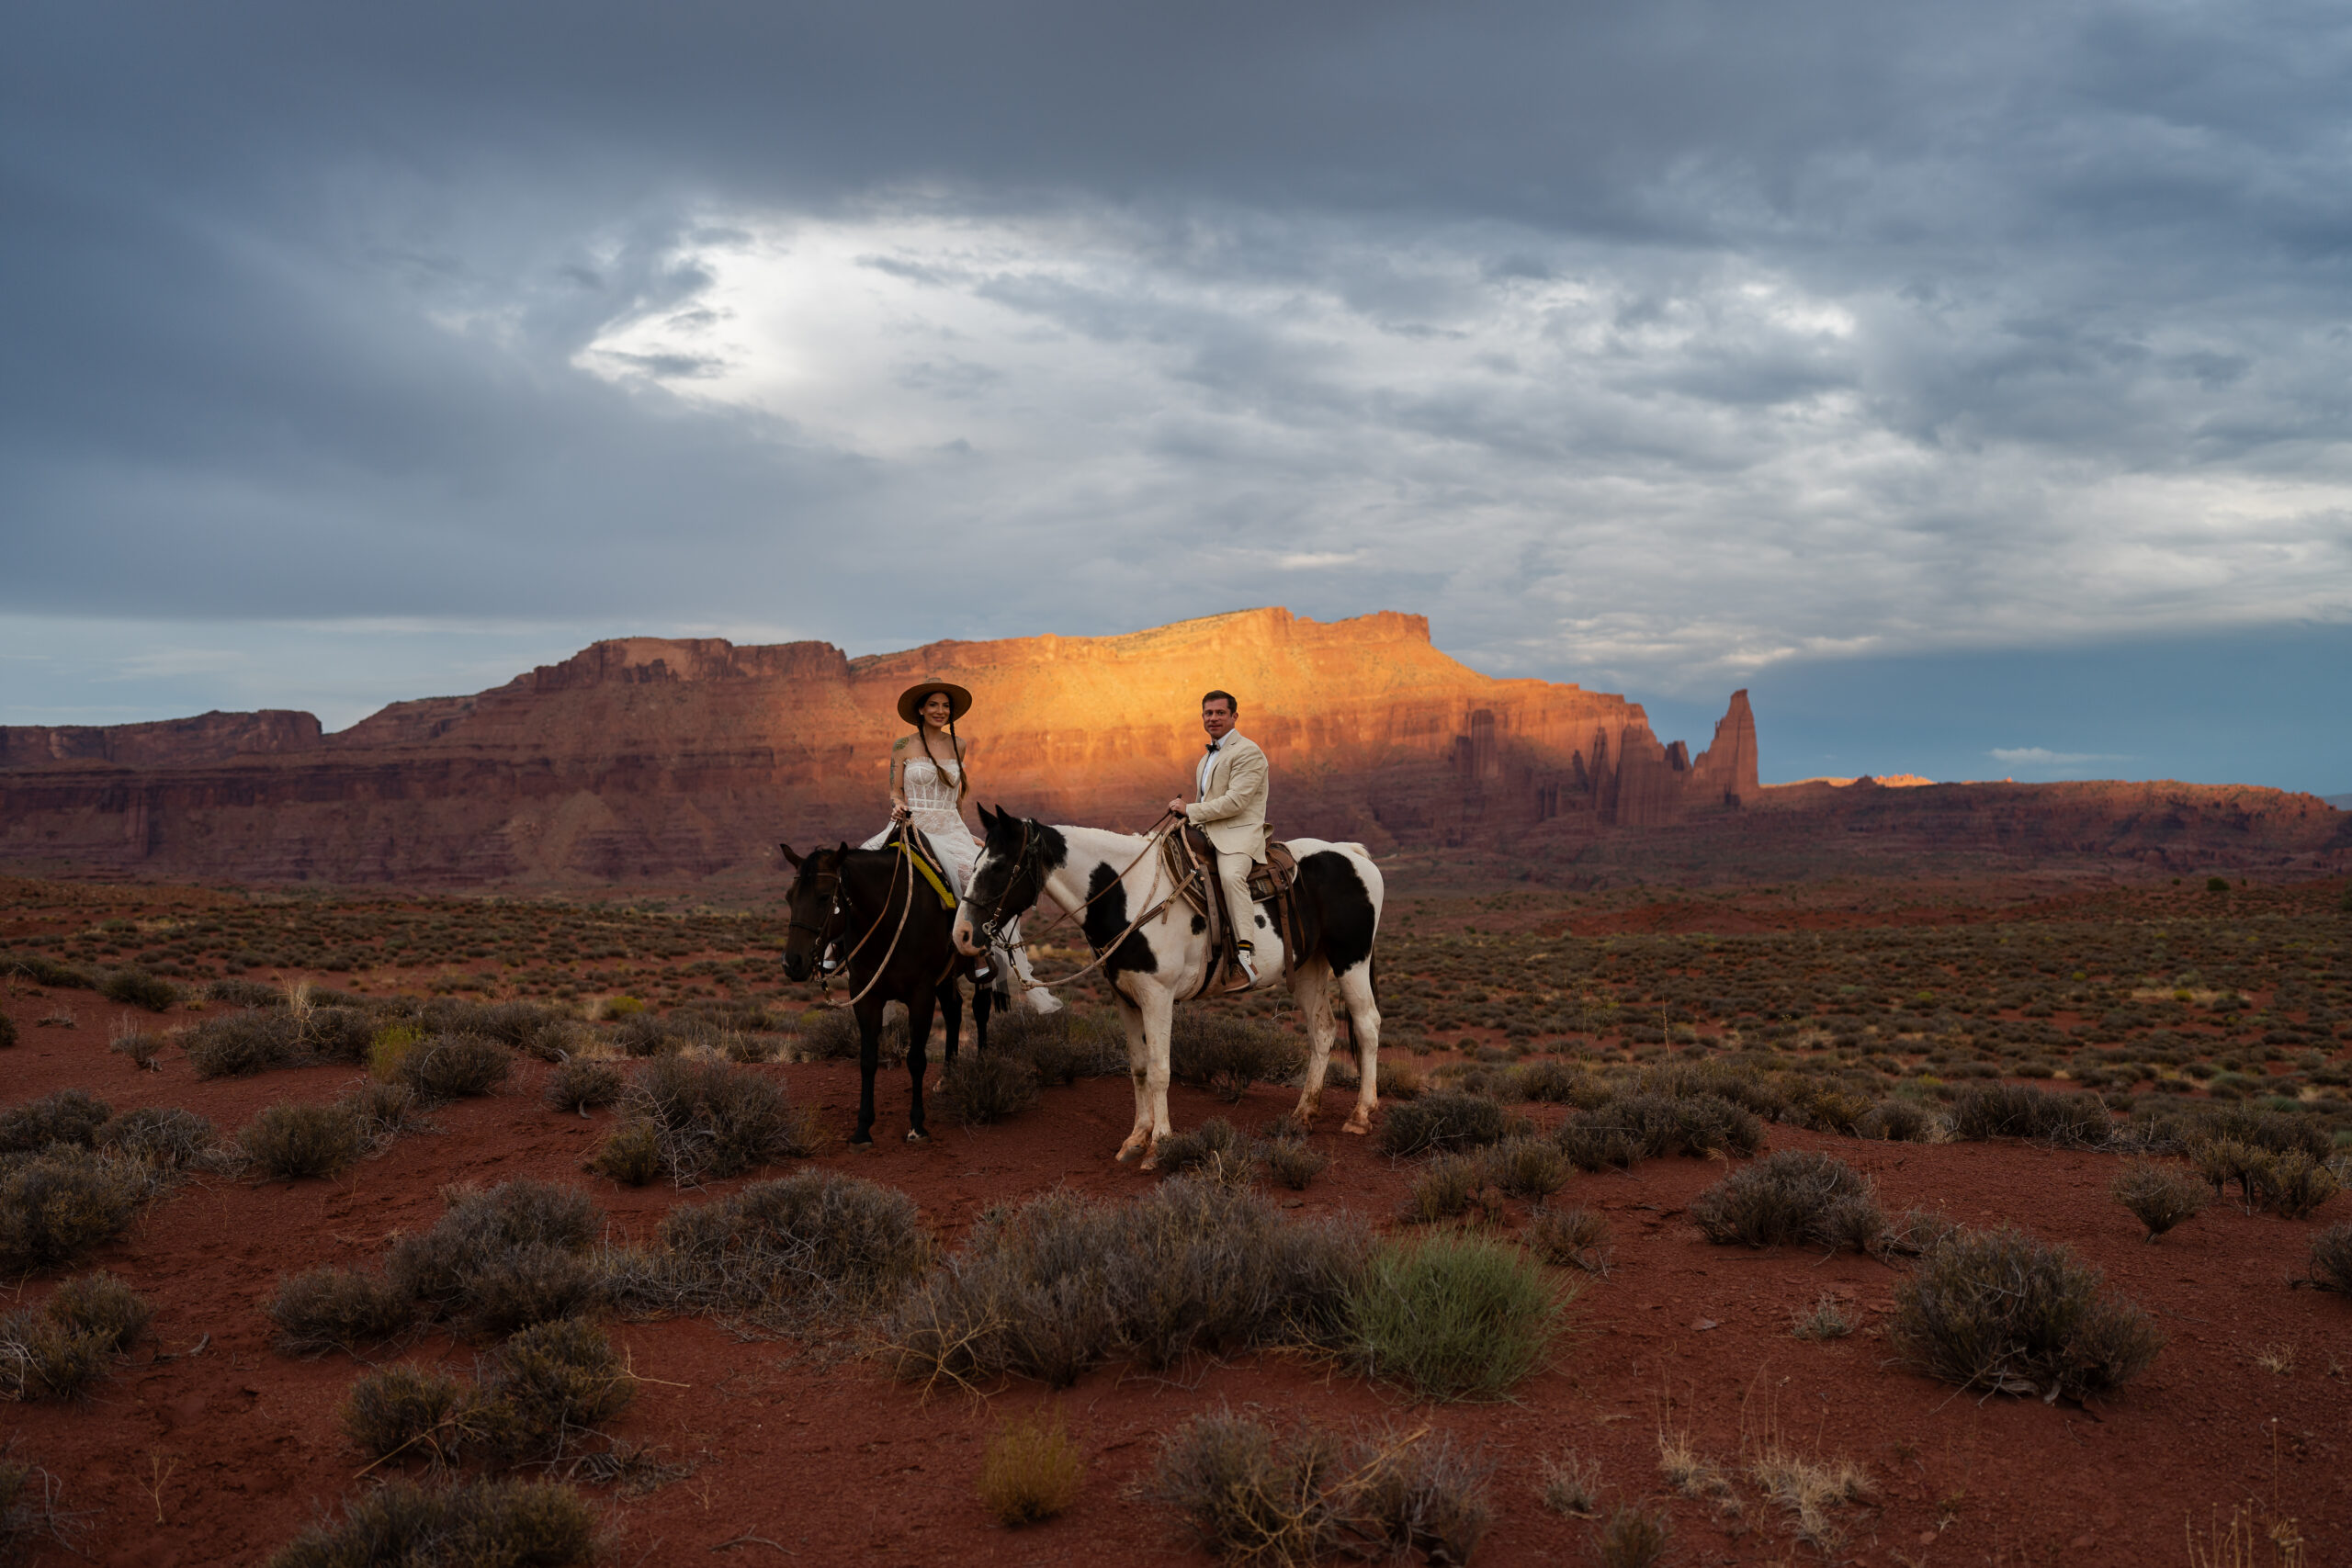 Bride and groom on horses facing the camera with the sun setting on the buttes and cliffs in the background in Moab, Utah